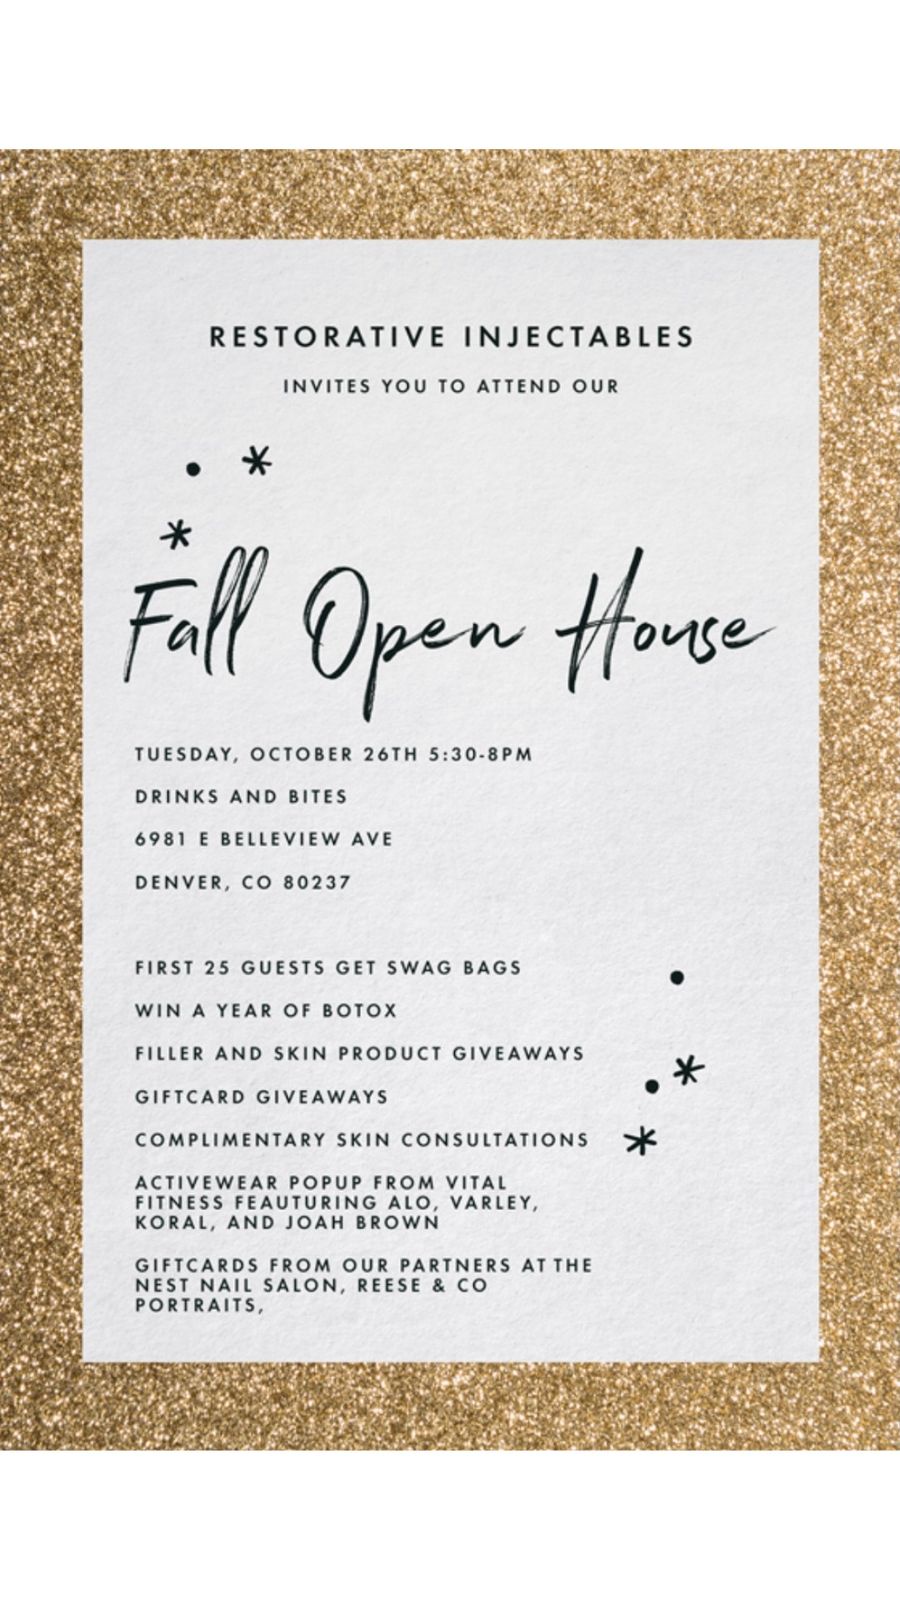 Fall Open House - Restorative Injectables